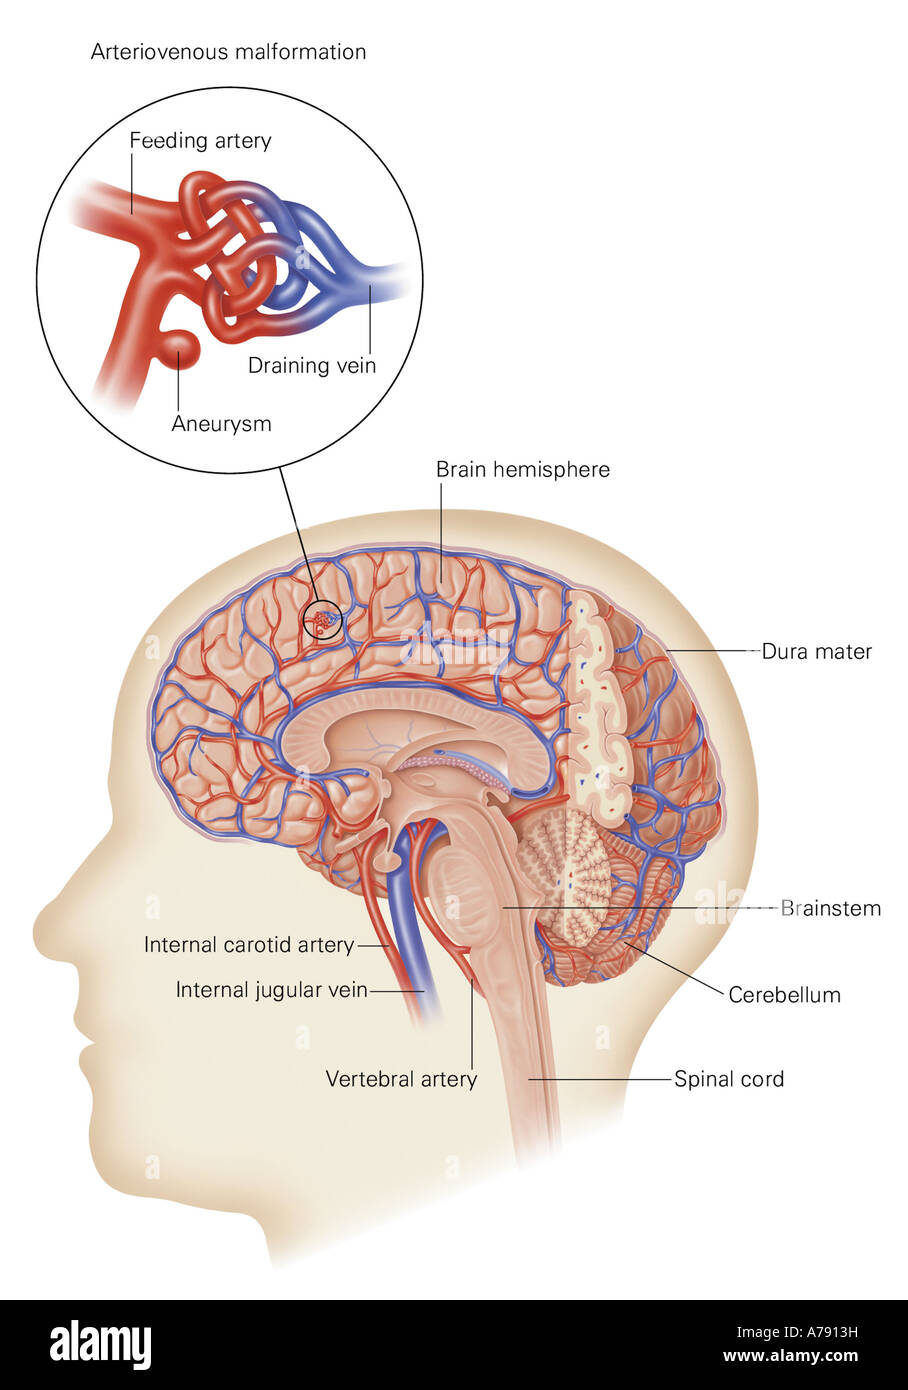 An illustration of the skull and brain showing an arteriovenous malformation. Stock Photo